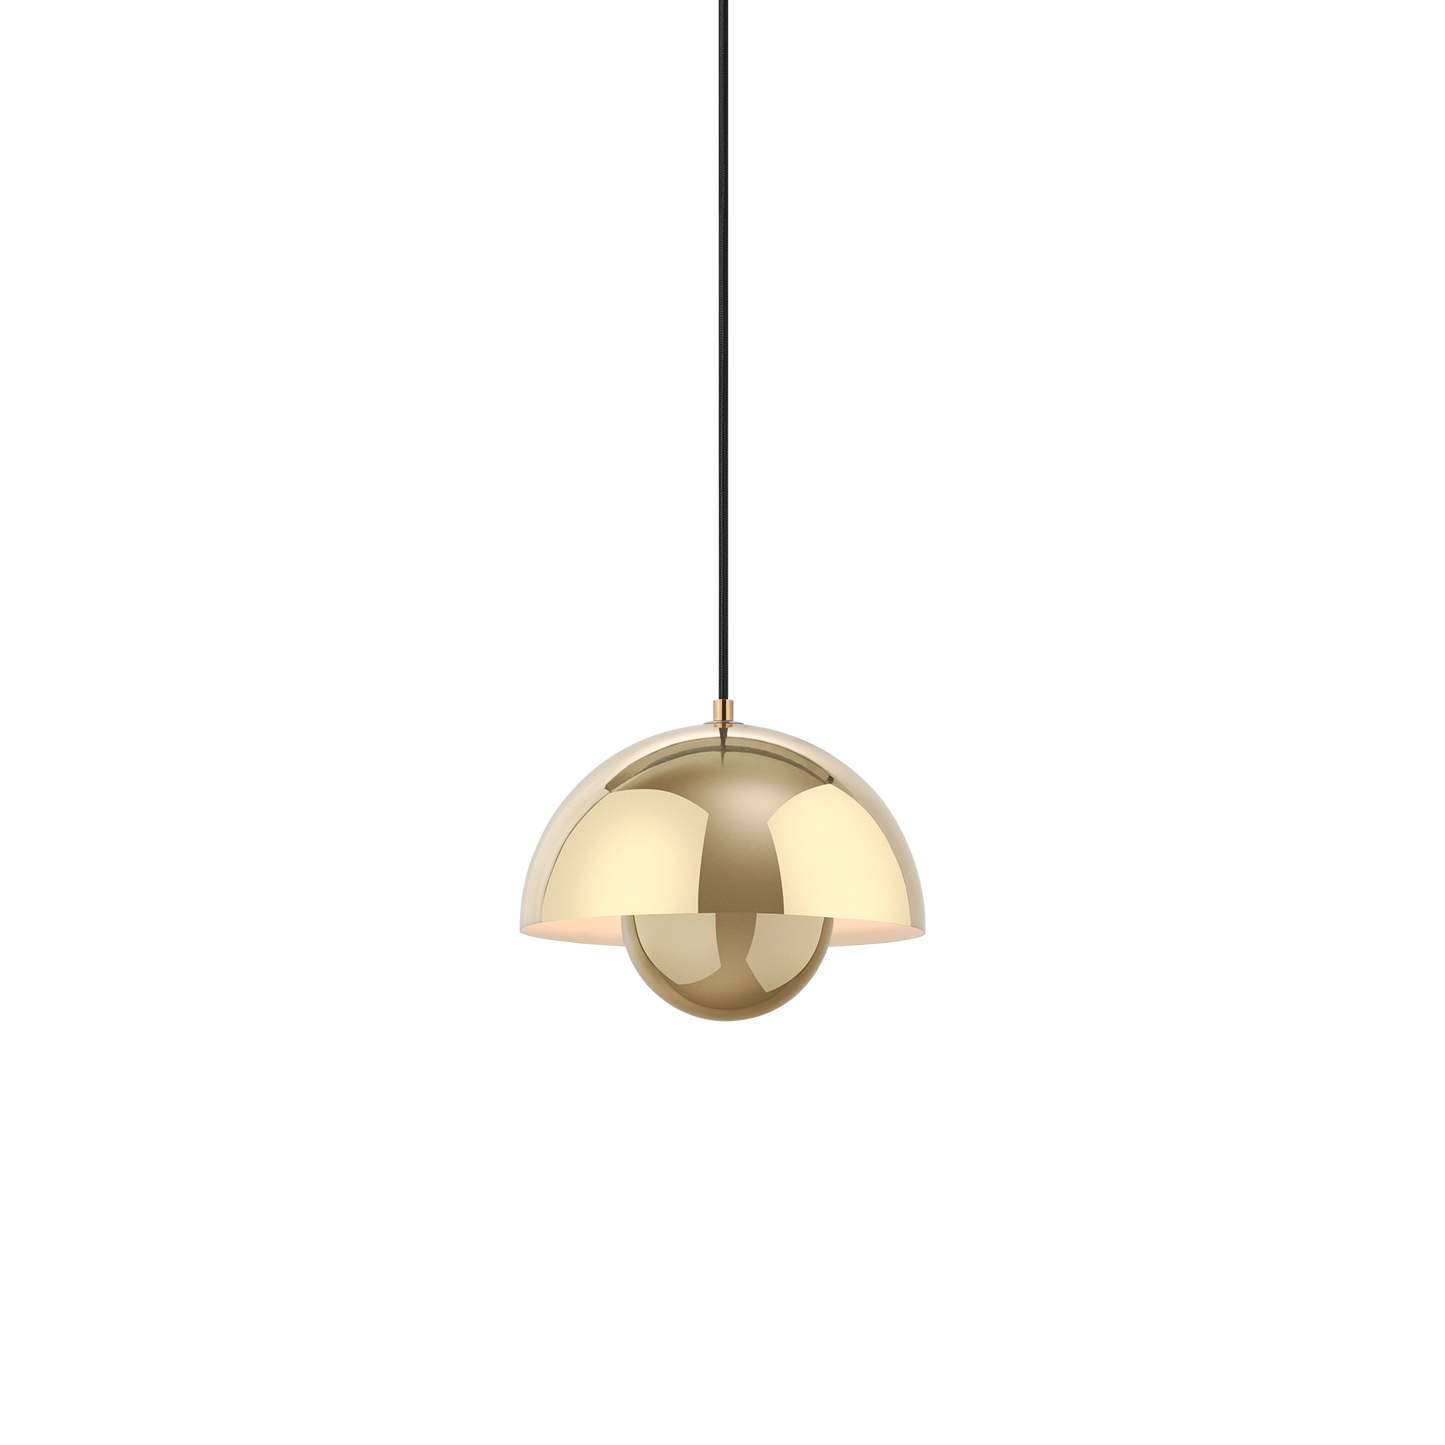 Flowerpot VP1 Pendant Lamp by &tradition #Polished Brass